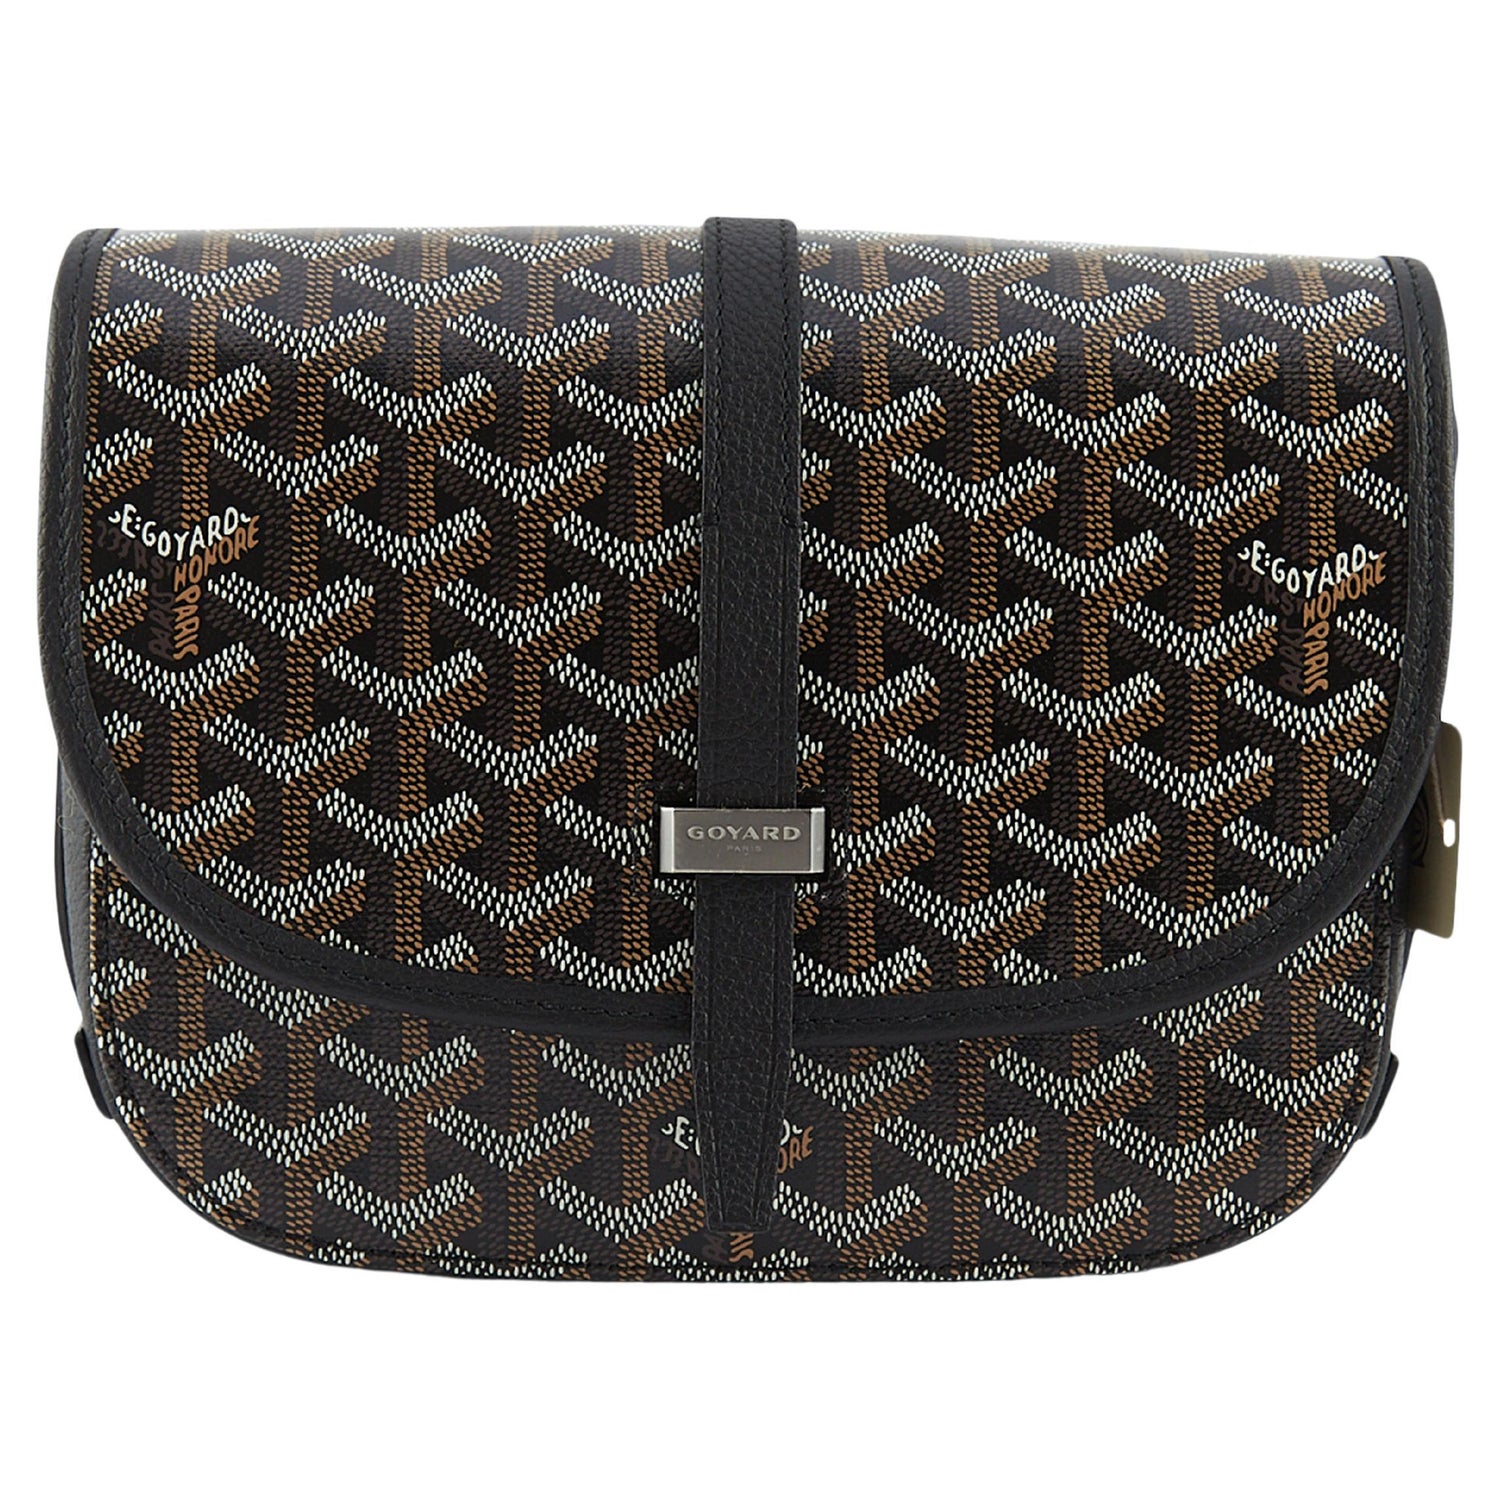 Goyard Belvedere MM Grey Used Couple Times - RRP £2,900